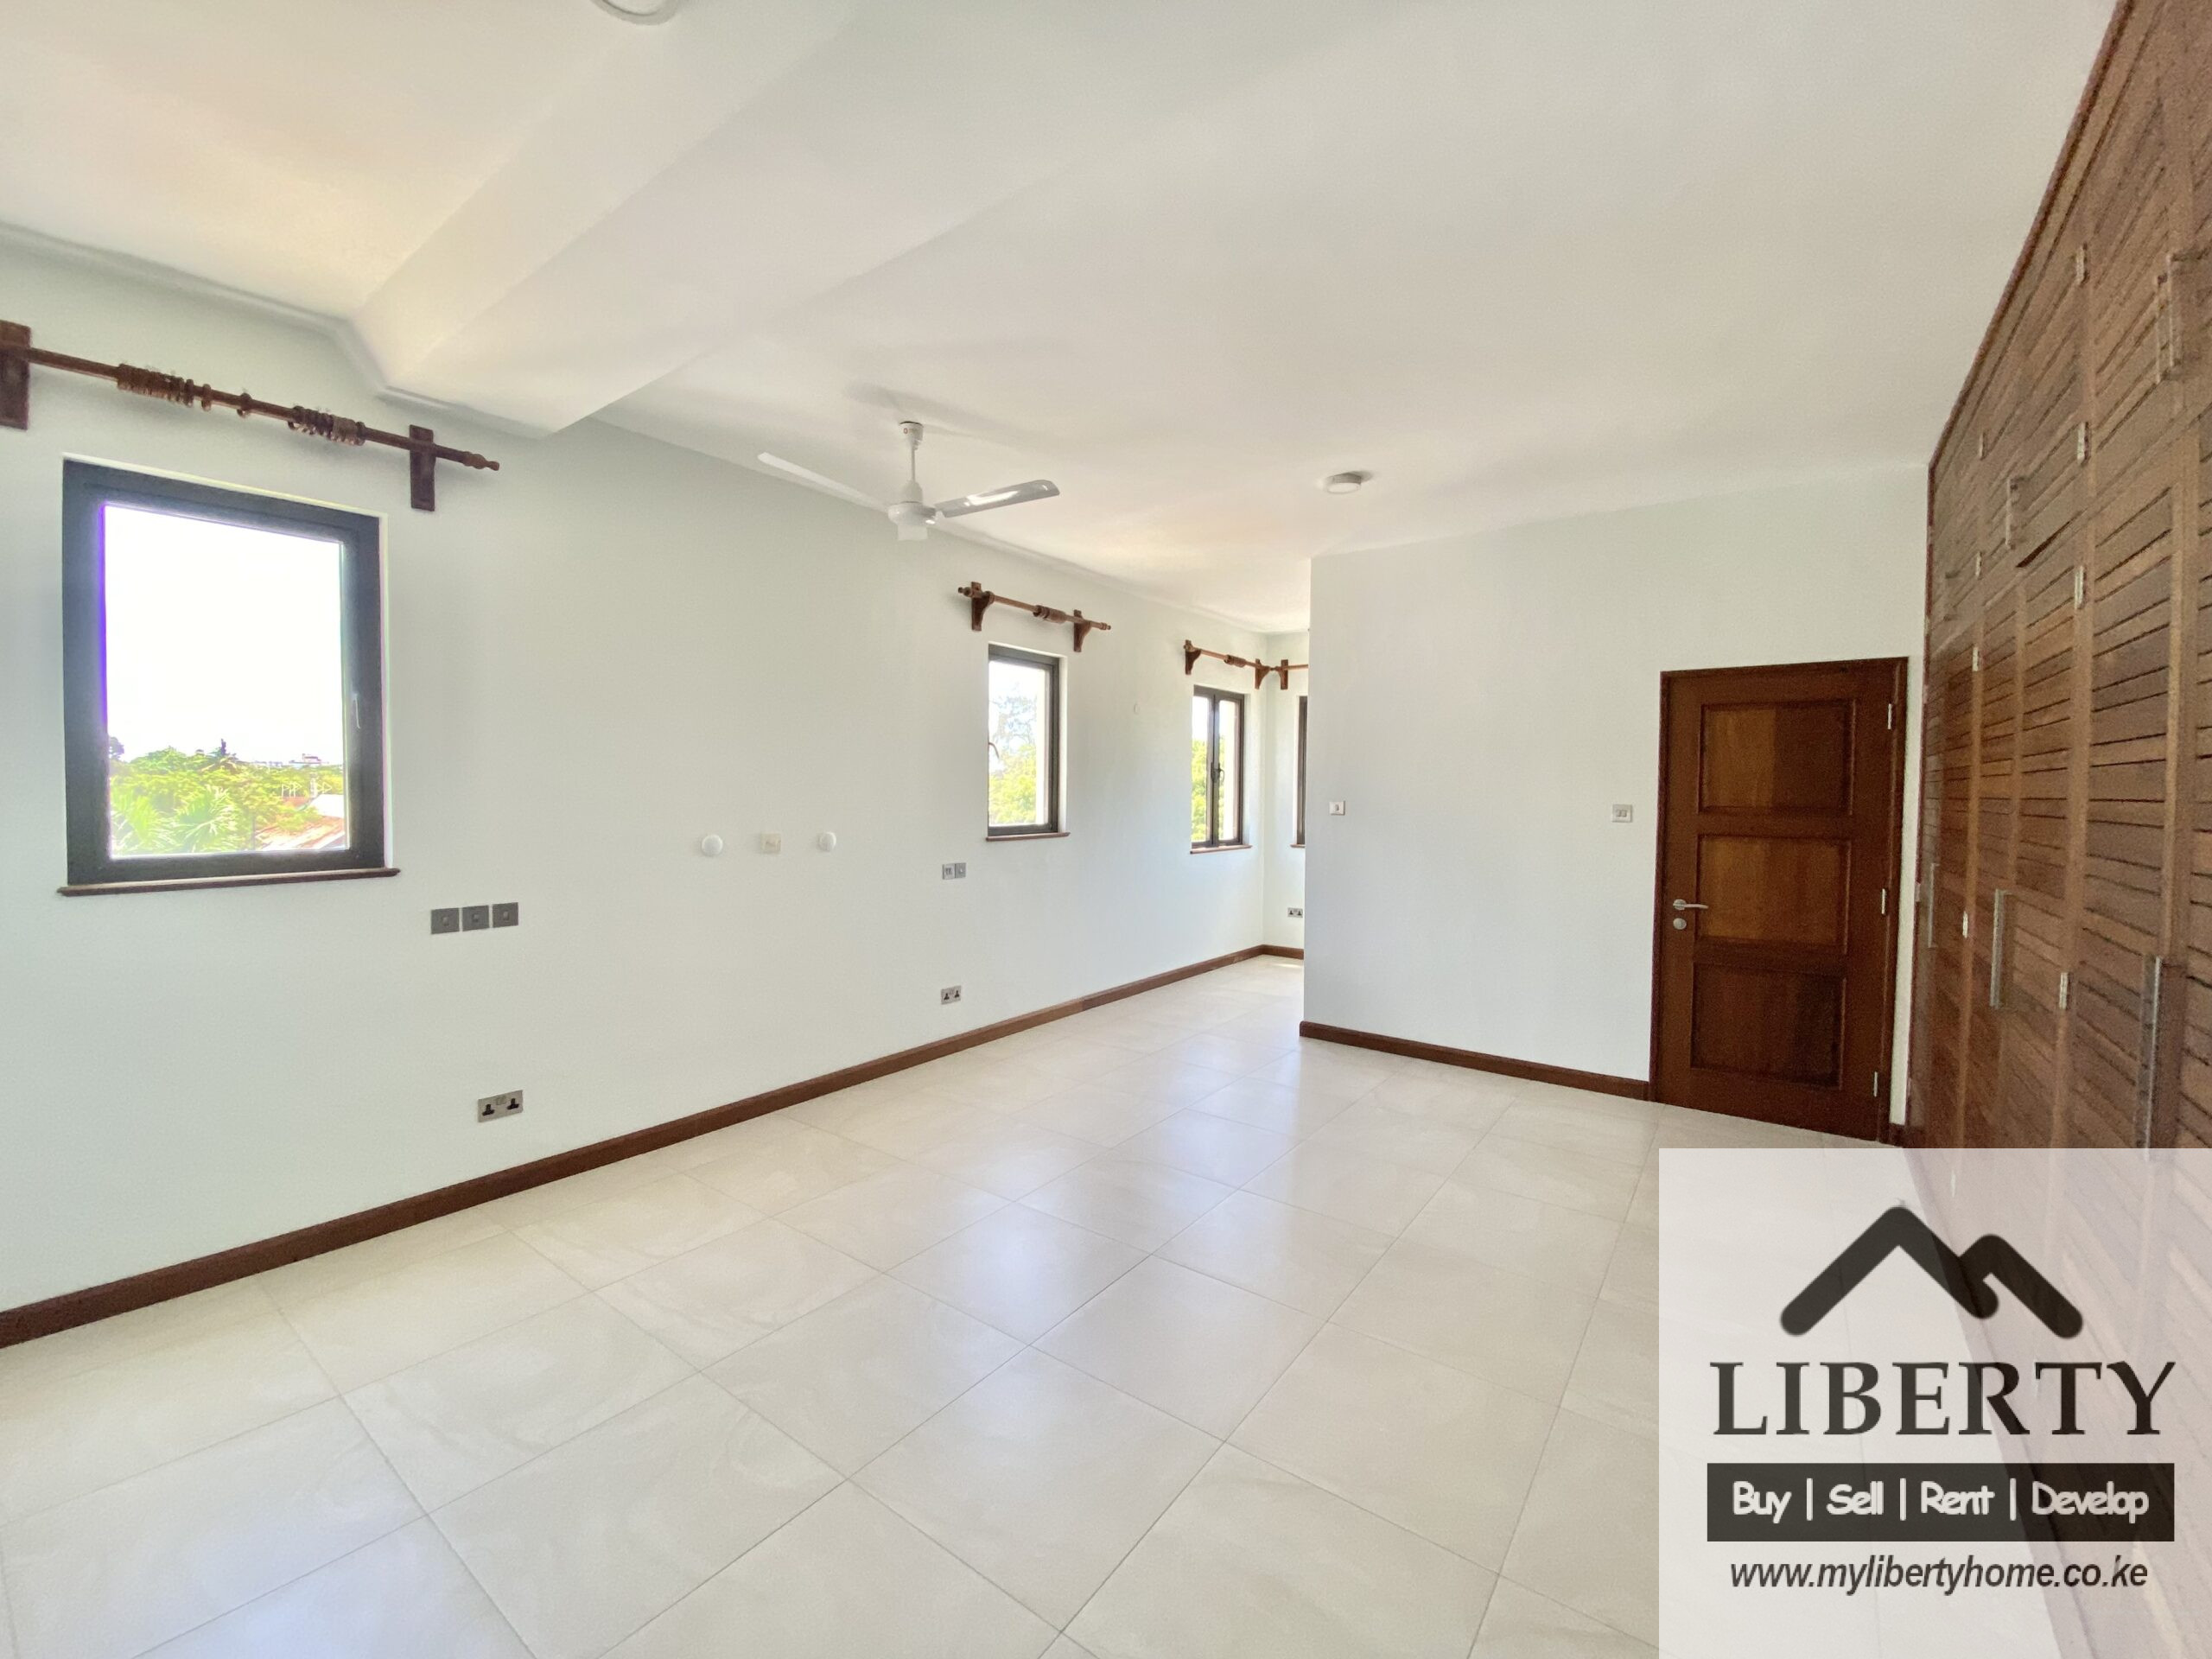 Exclusive Ocean View 2 Bedroom Unfurnished Apartment In Mombasa-Nyali For Sale-0M- Ref-780